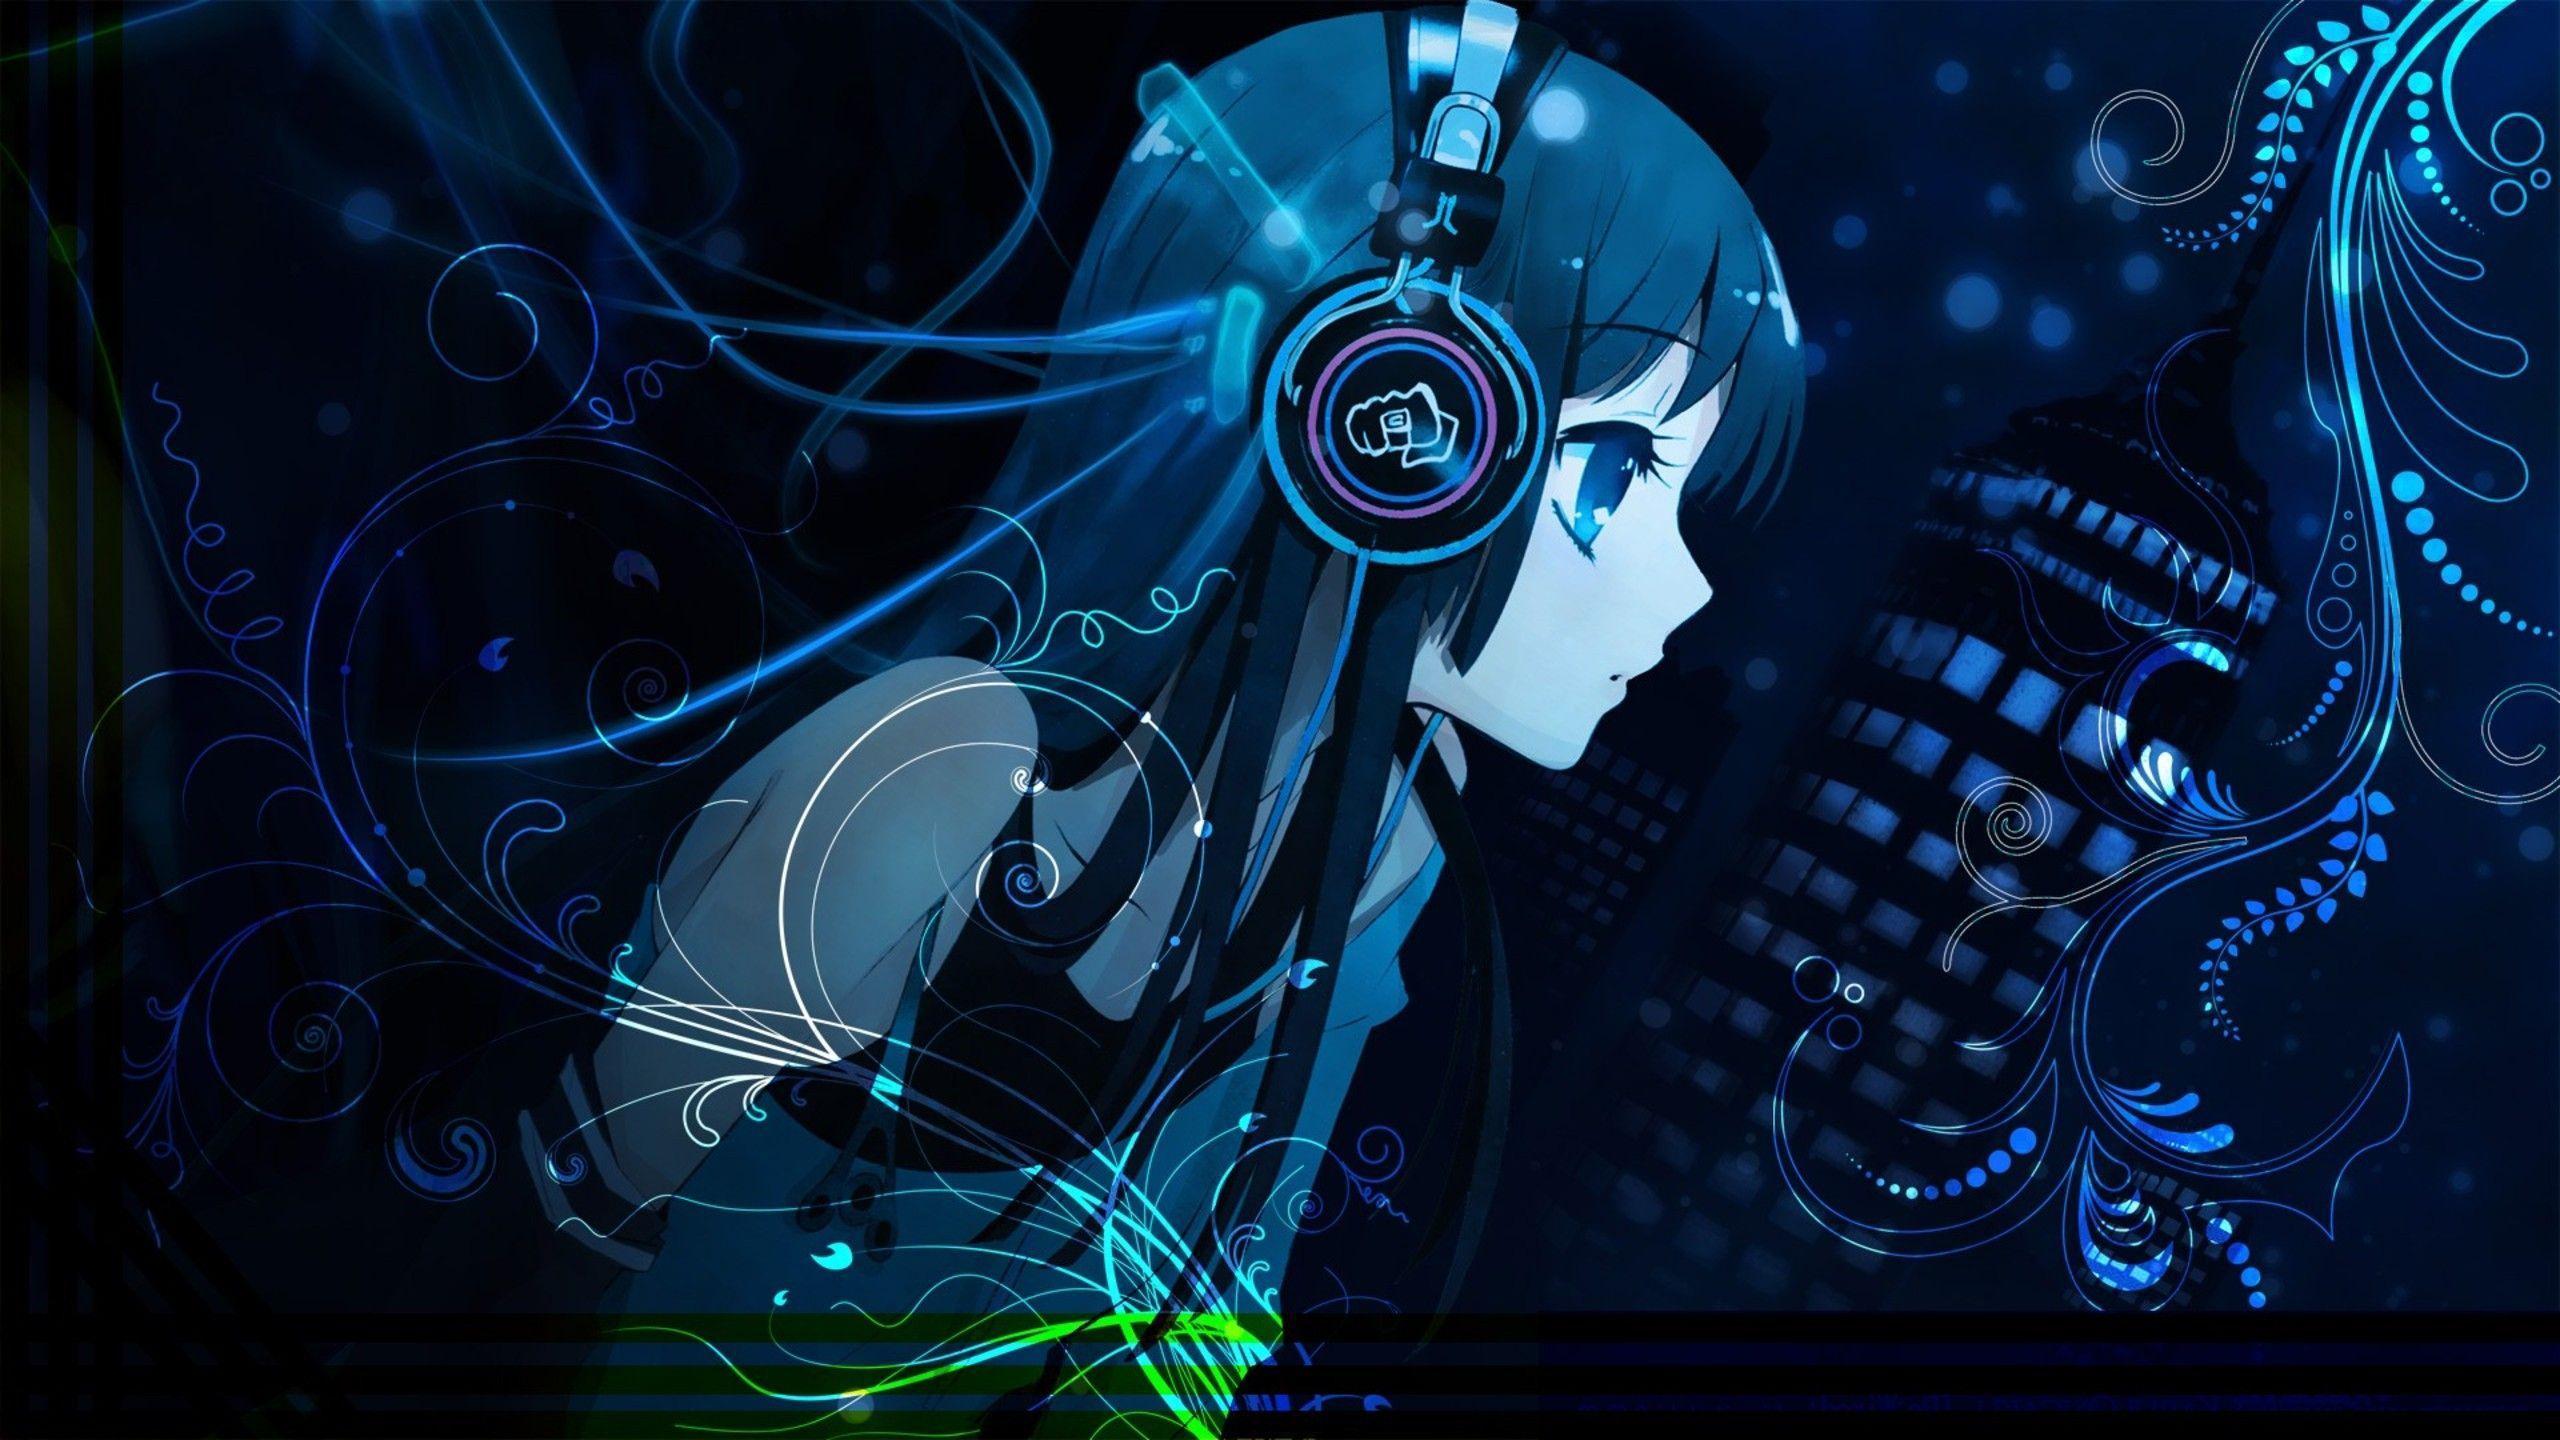 Cute Anime Girl With Headphones Wallpaper For Computers